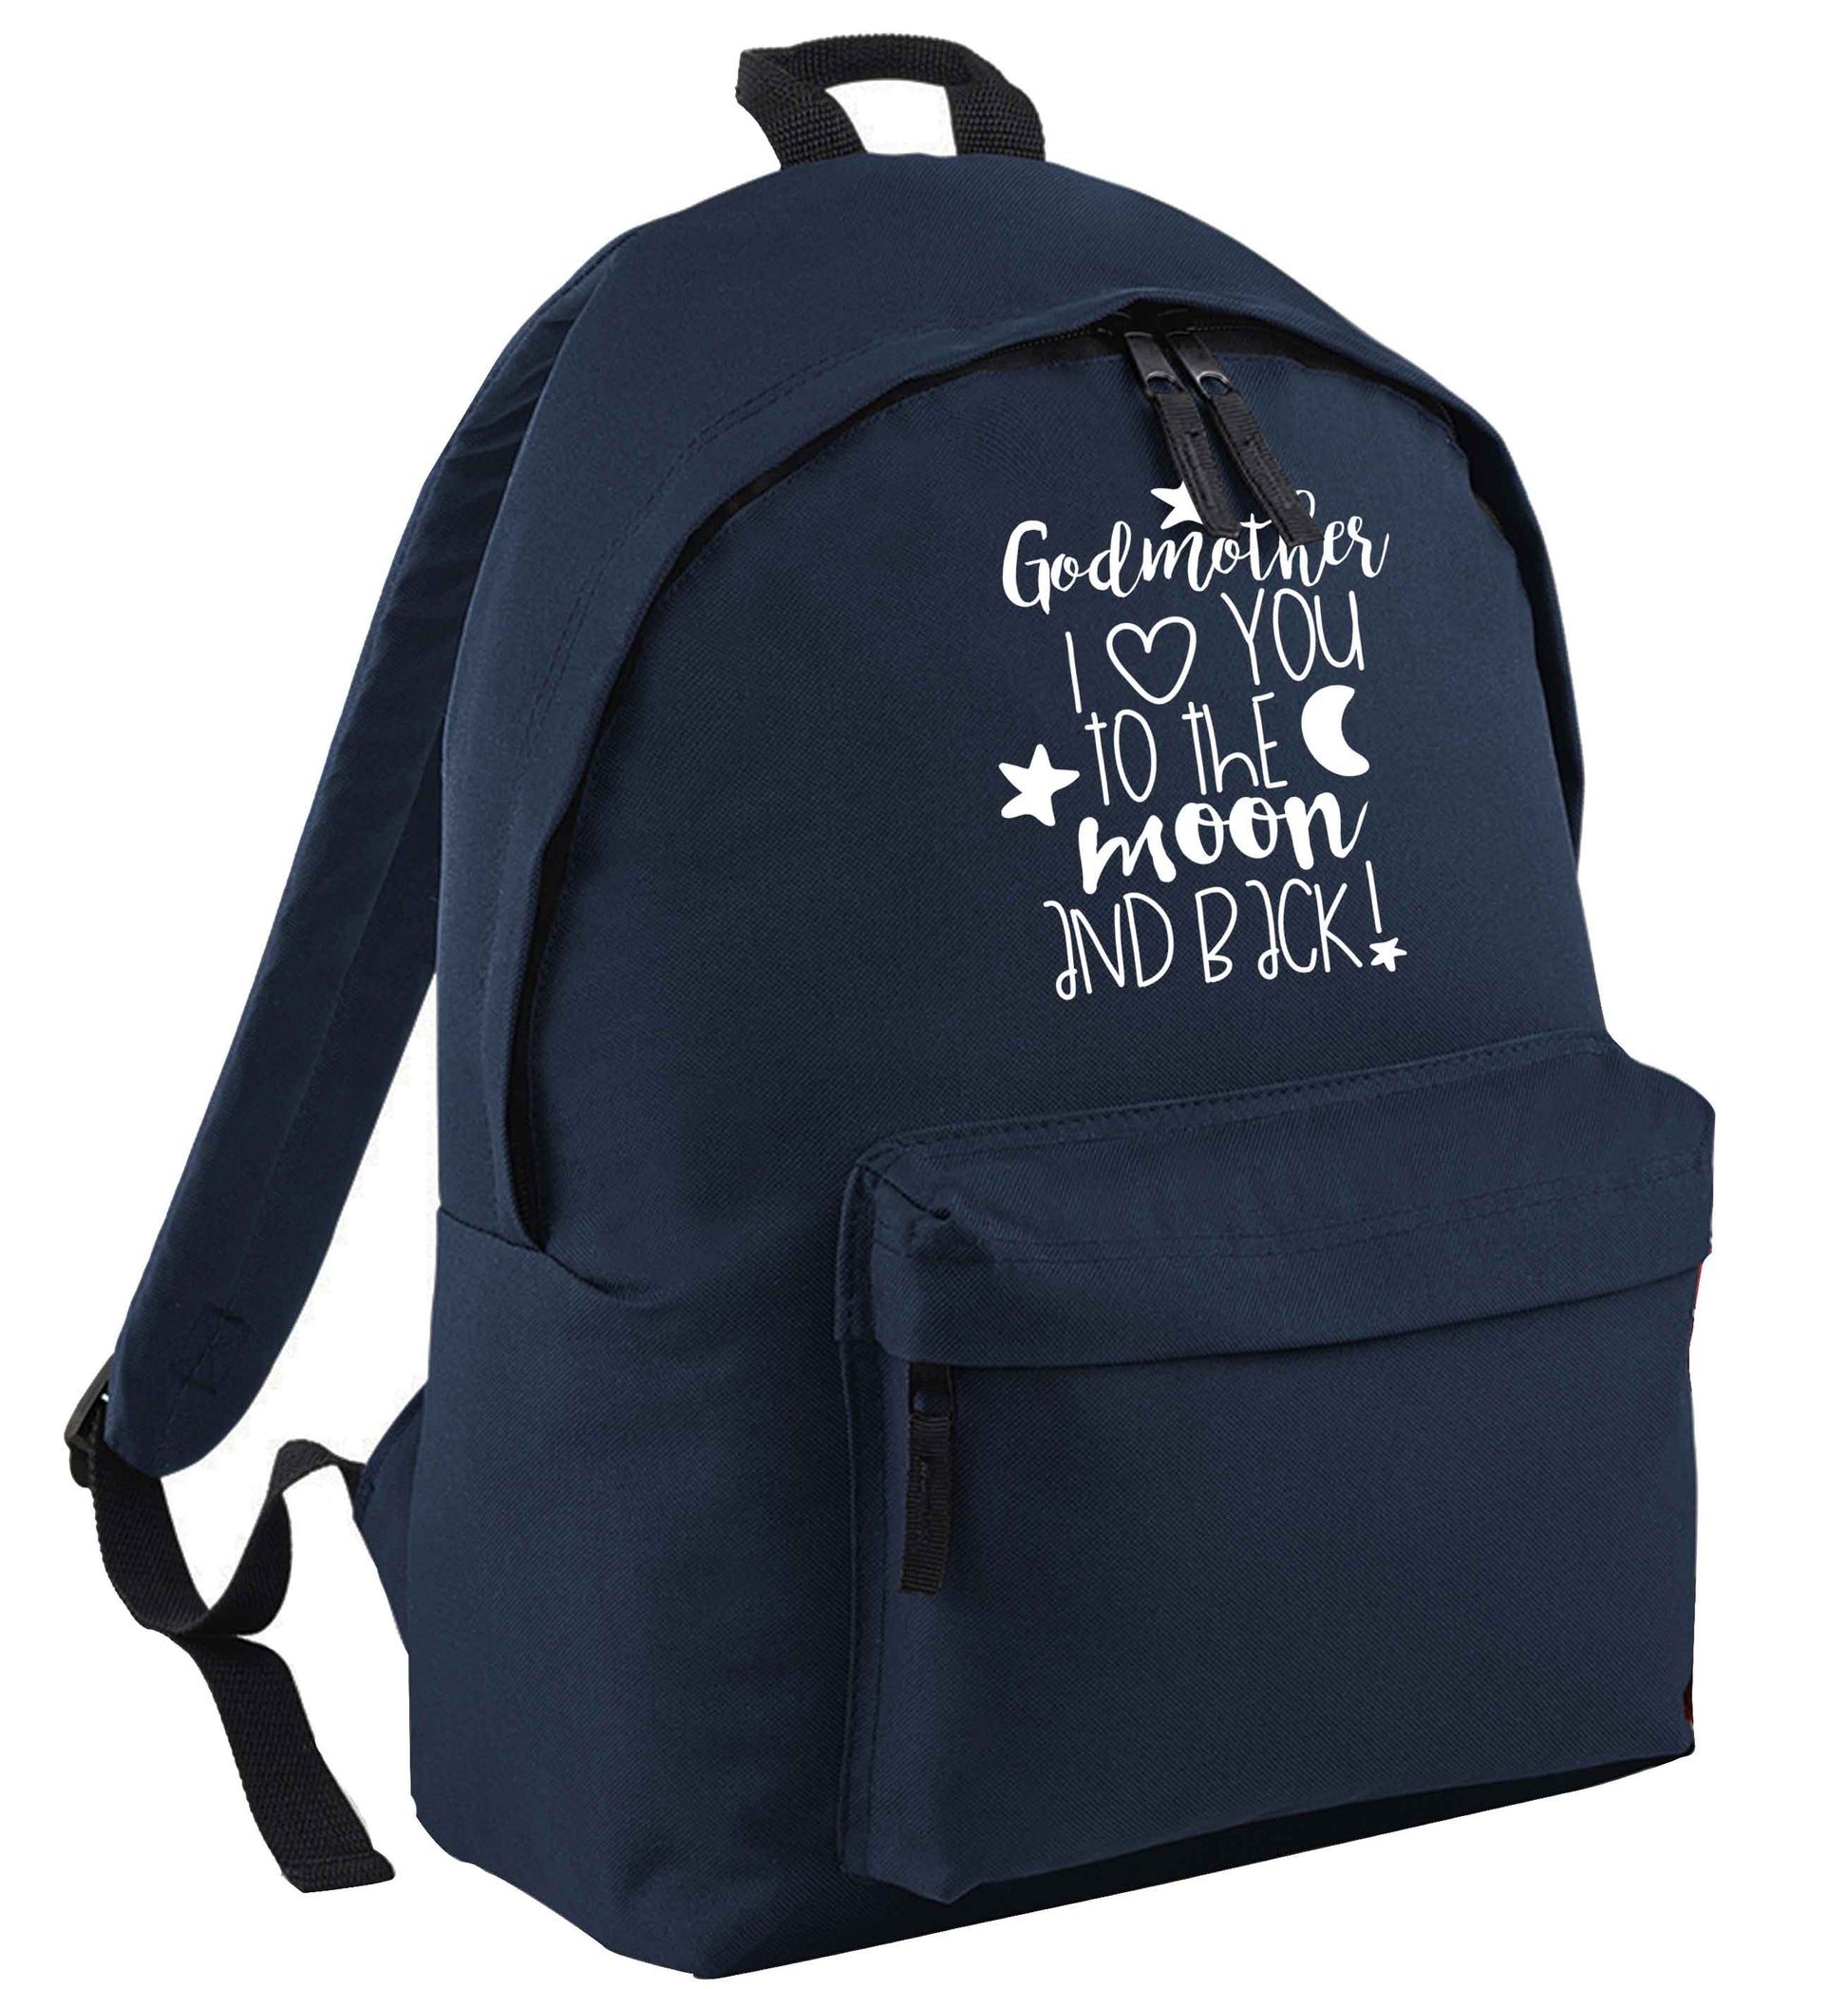 Godmother I love you to the moon and back navy adults backpack